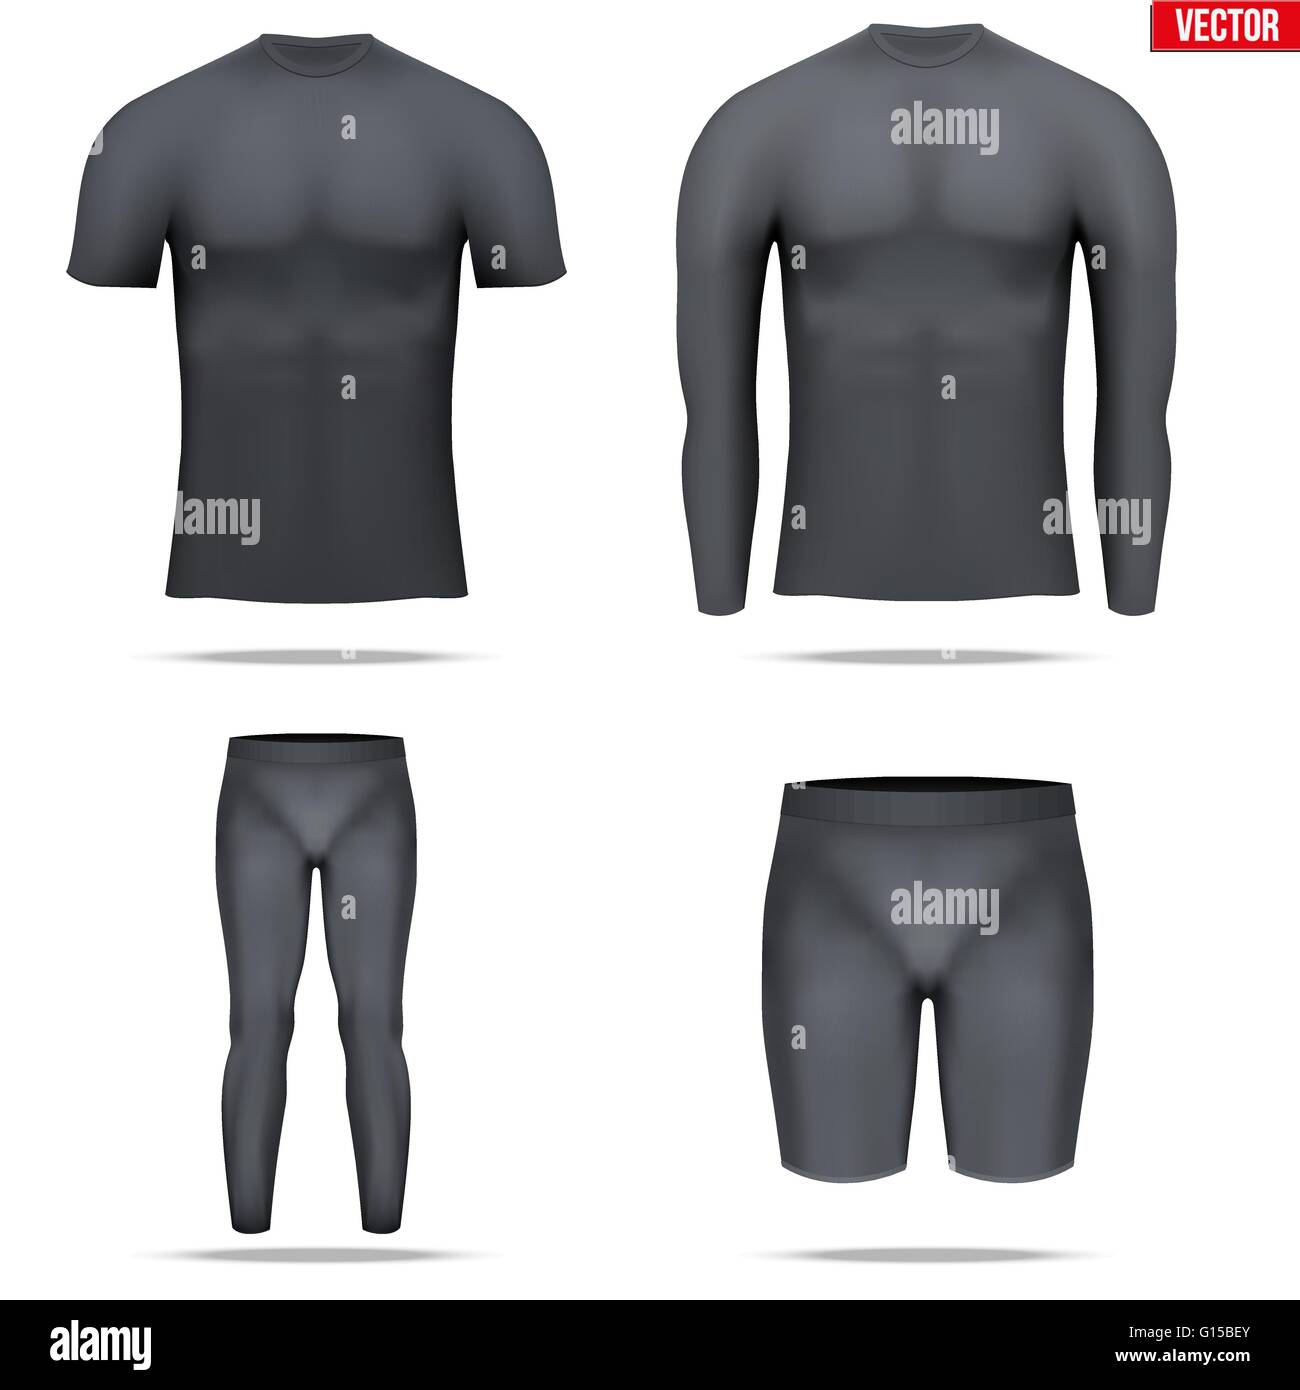 Under layer compression shirt with long sleeve of thermo fabric Stock Vector